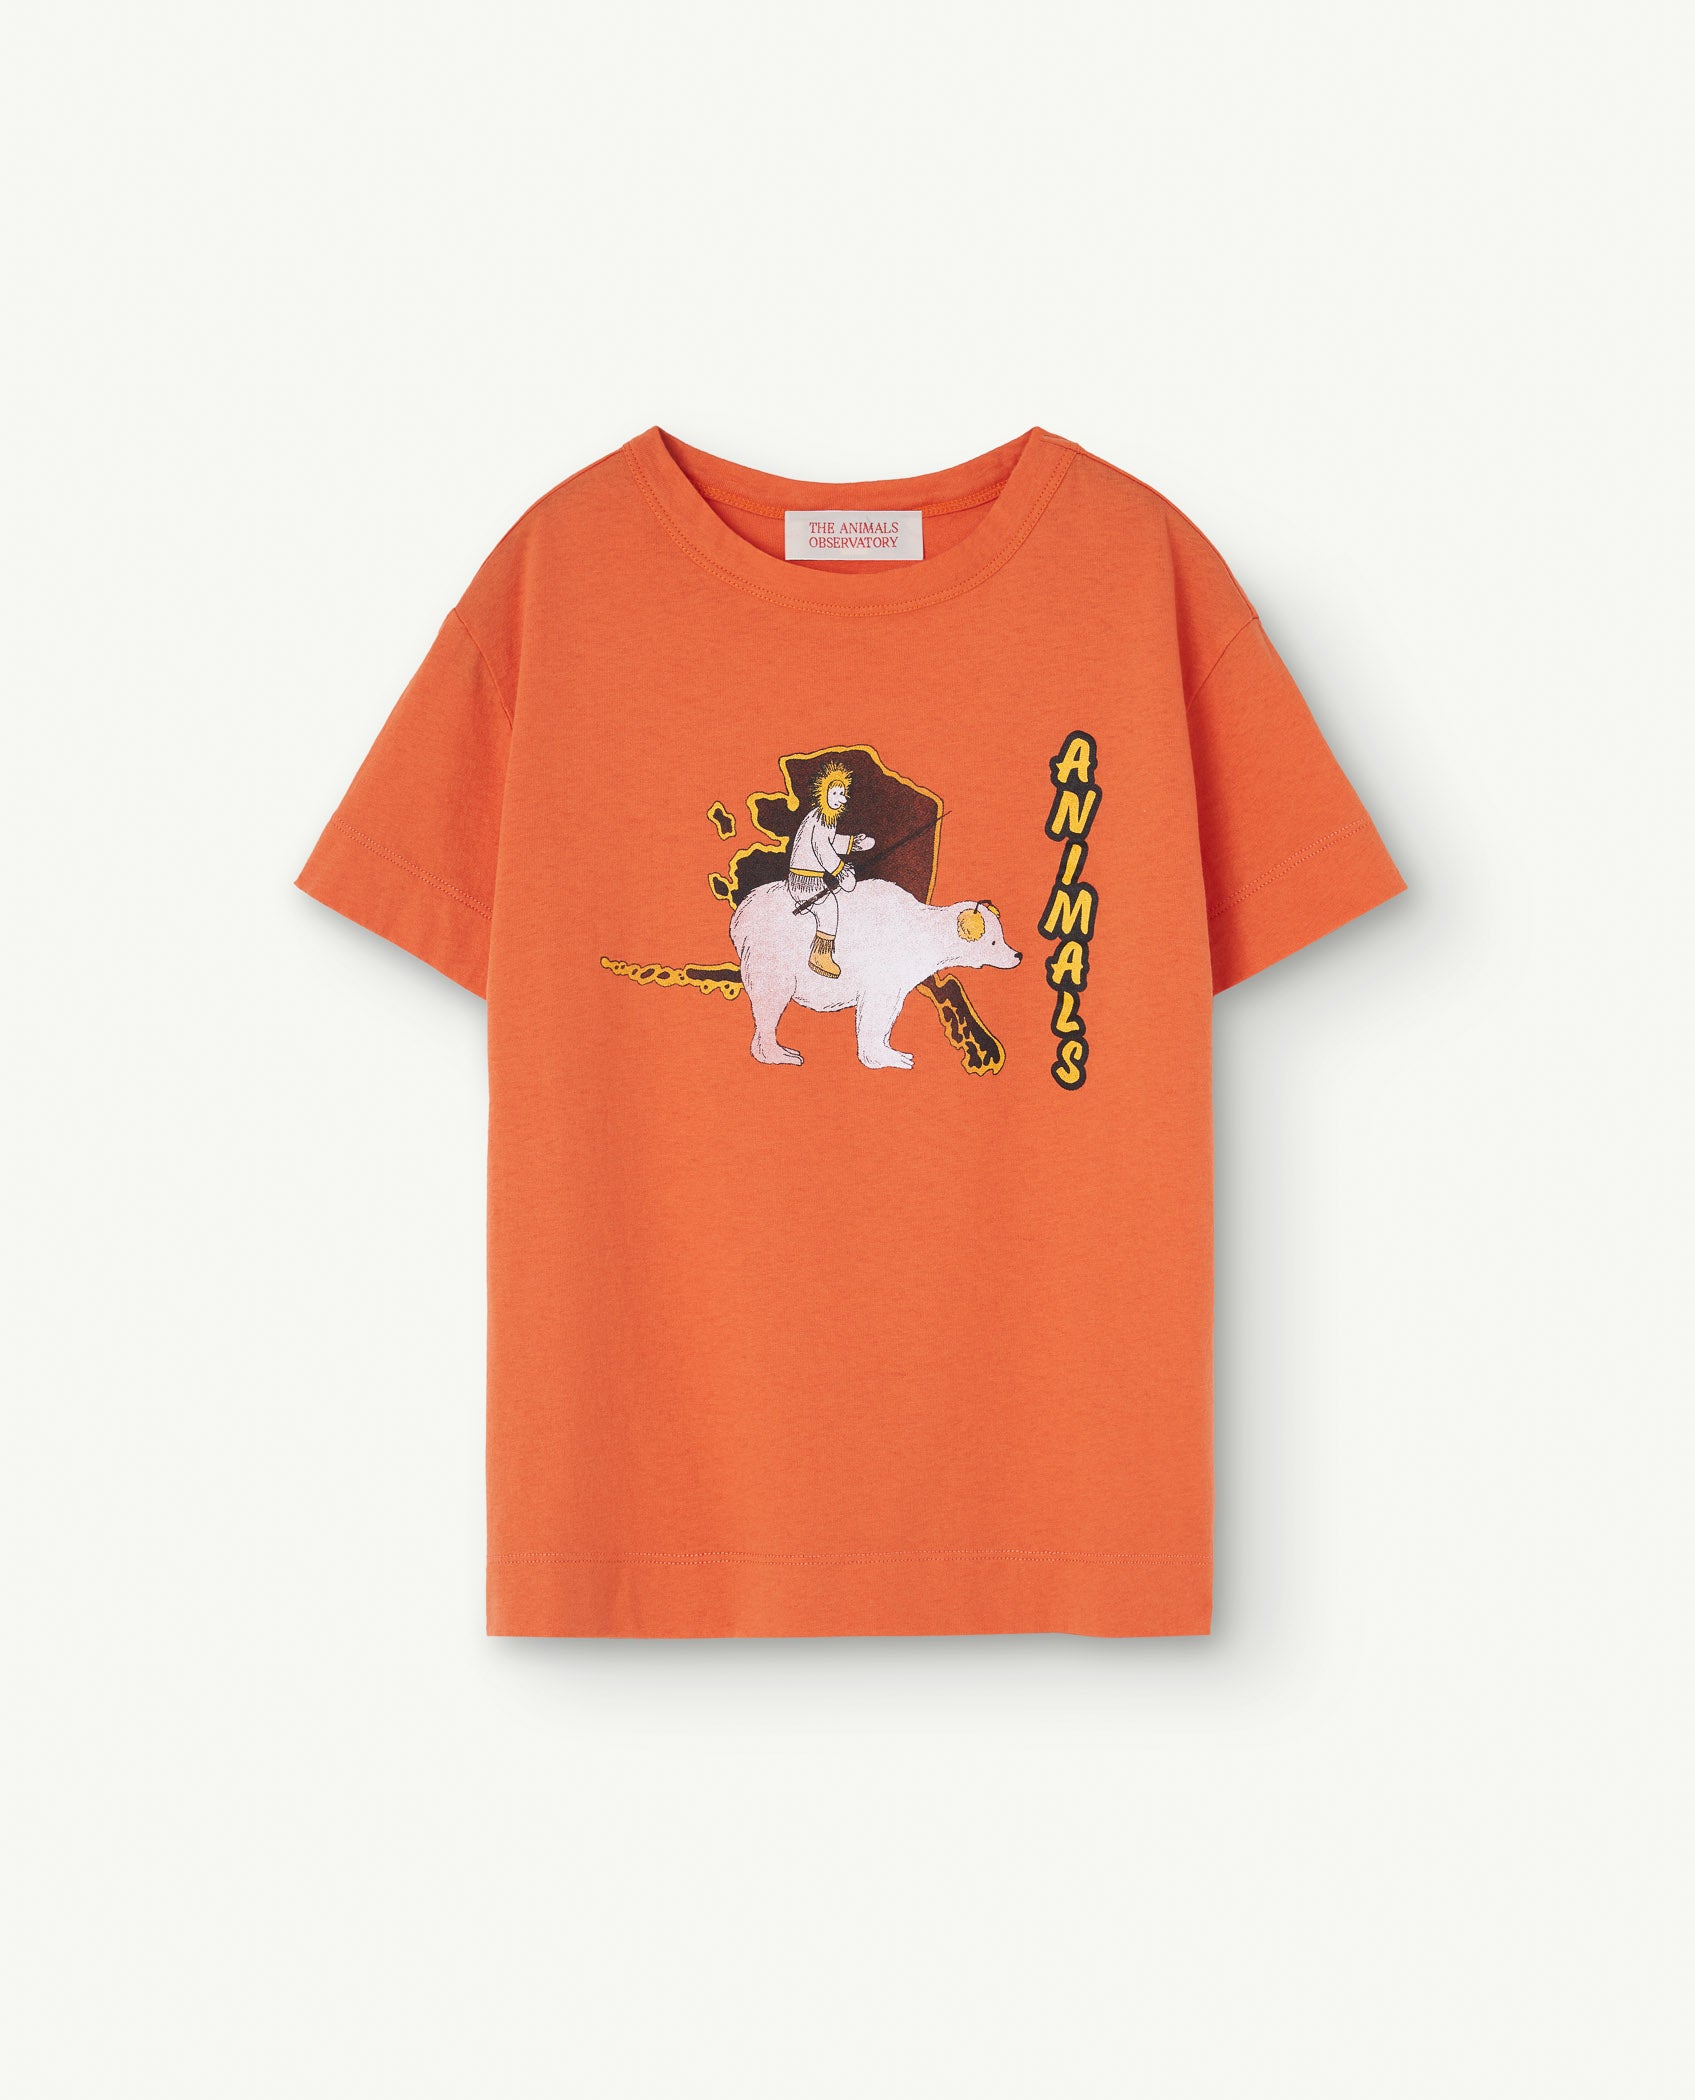 Rooster Kinder T-Shirt Rot